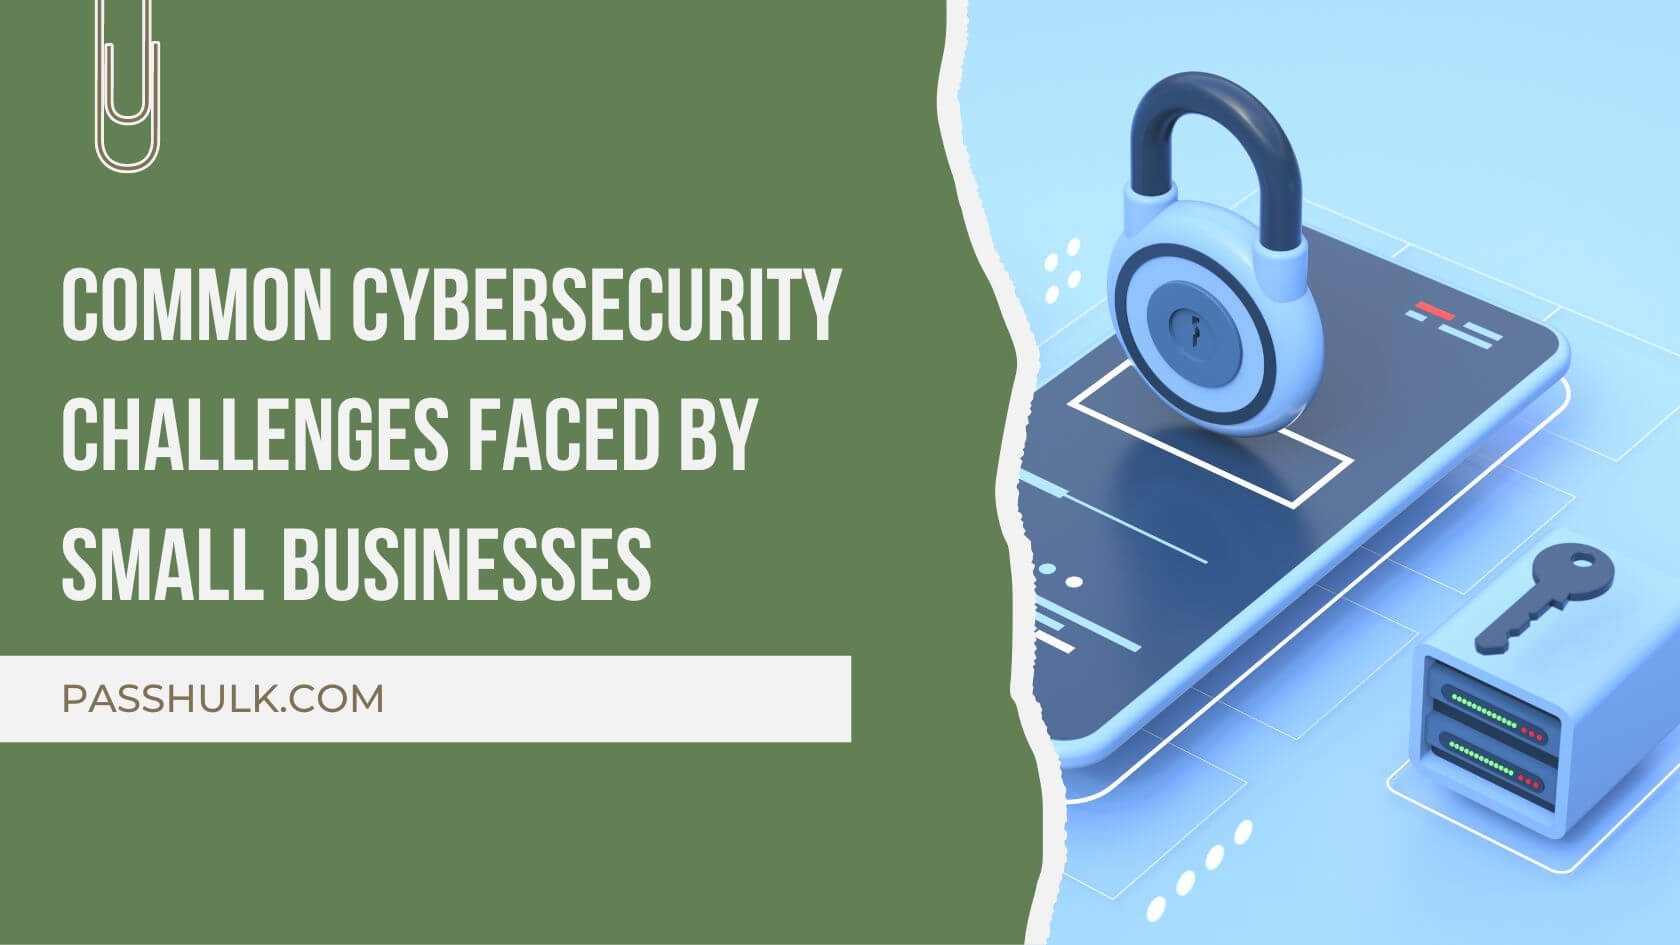 Common Cybersecurity Challenges Faced by Small Businesses